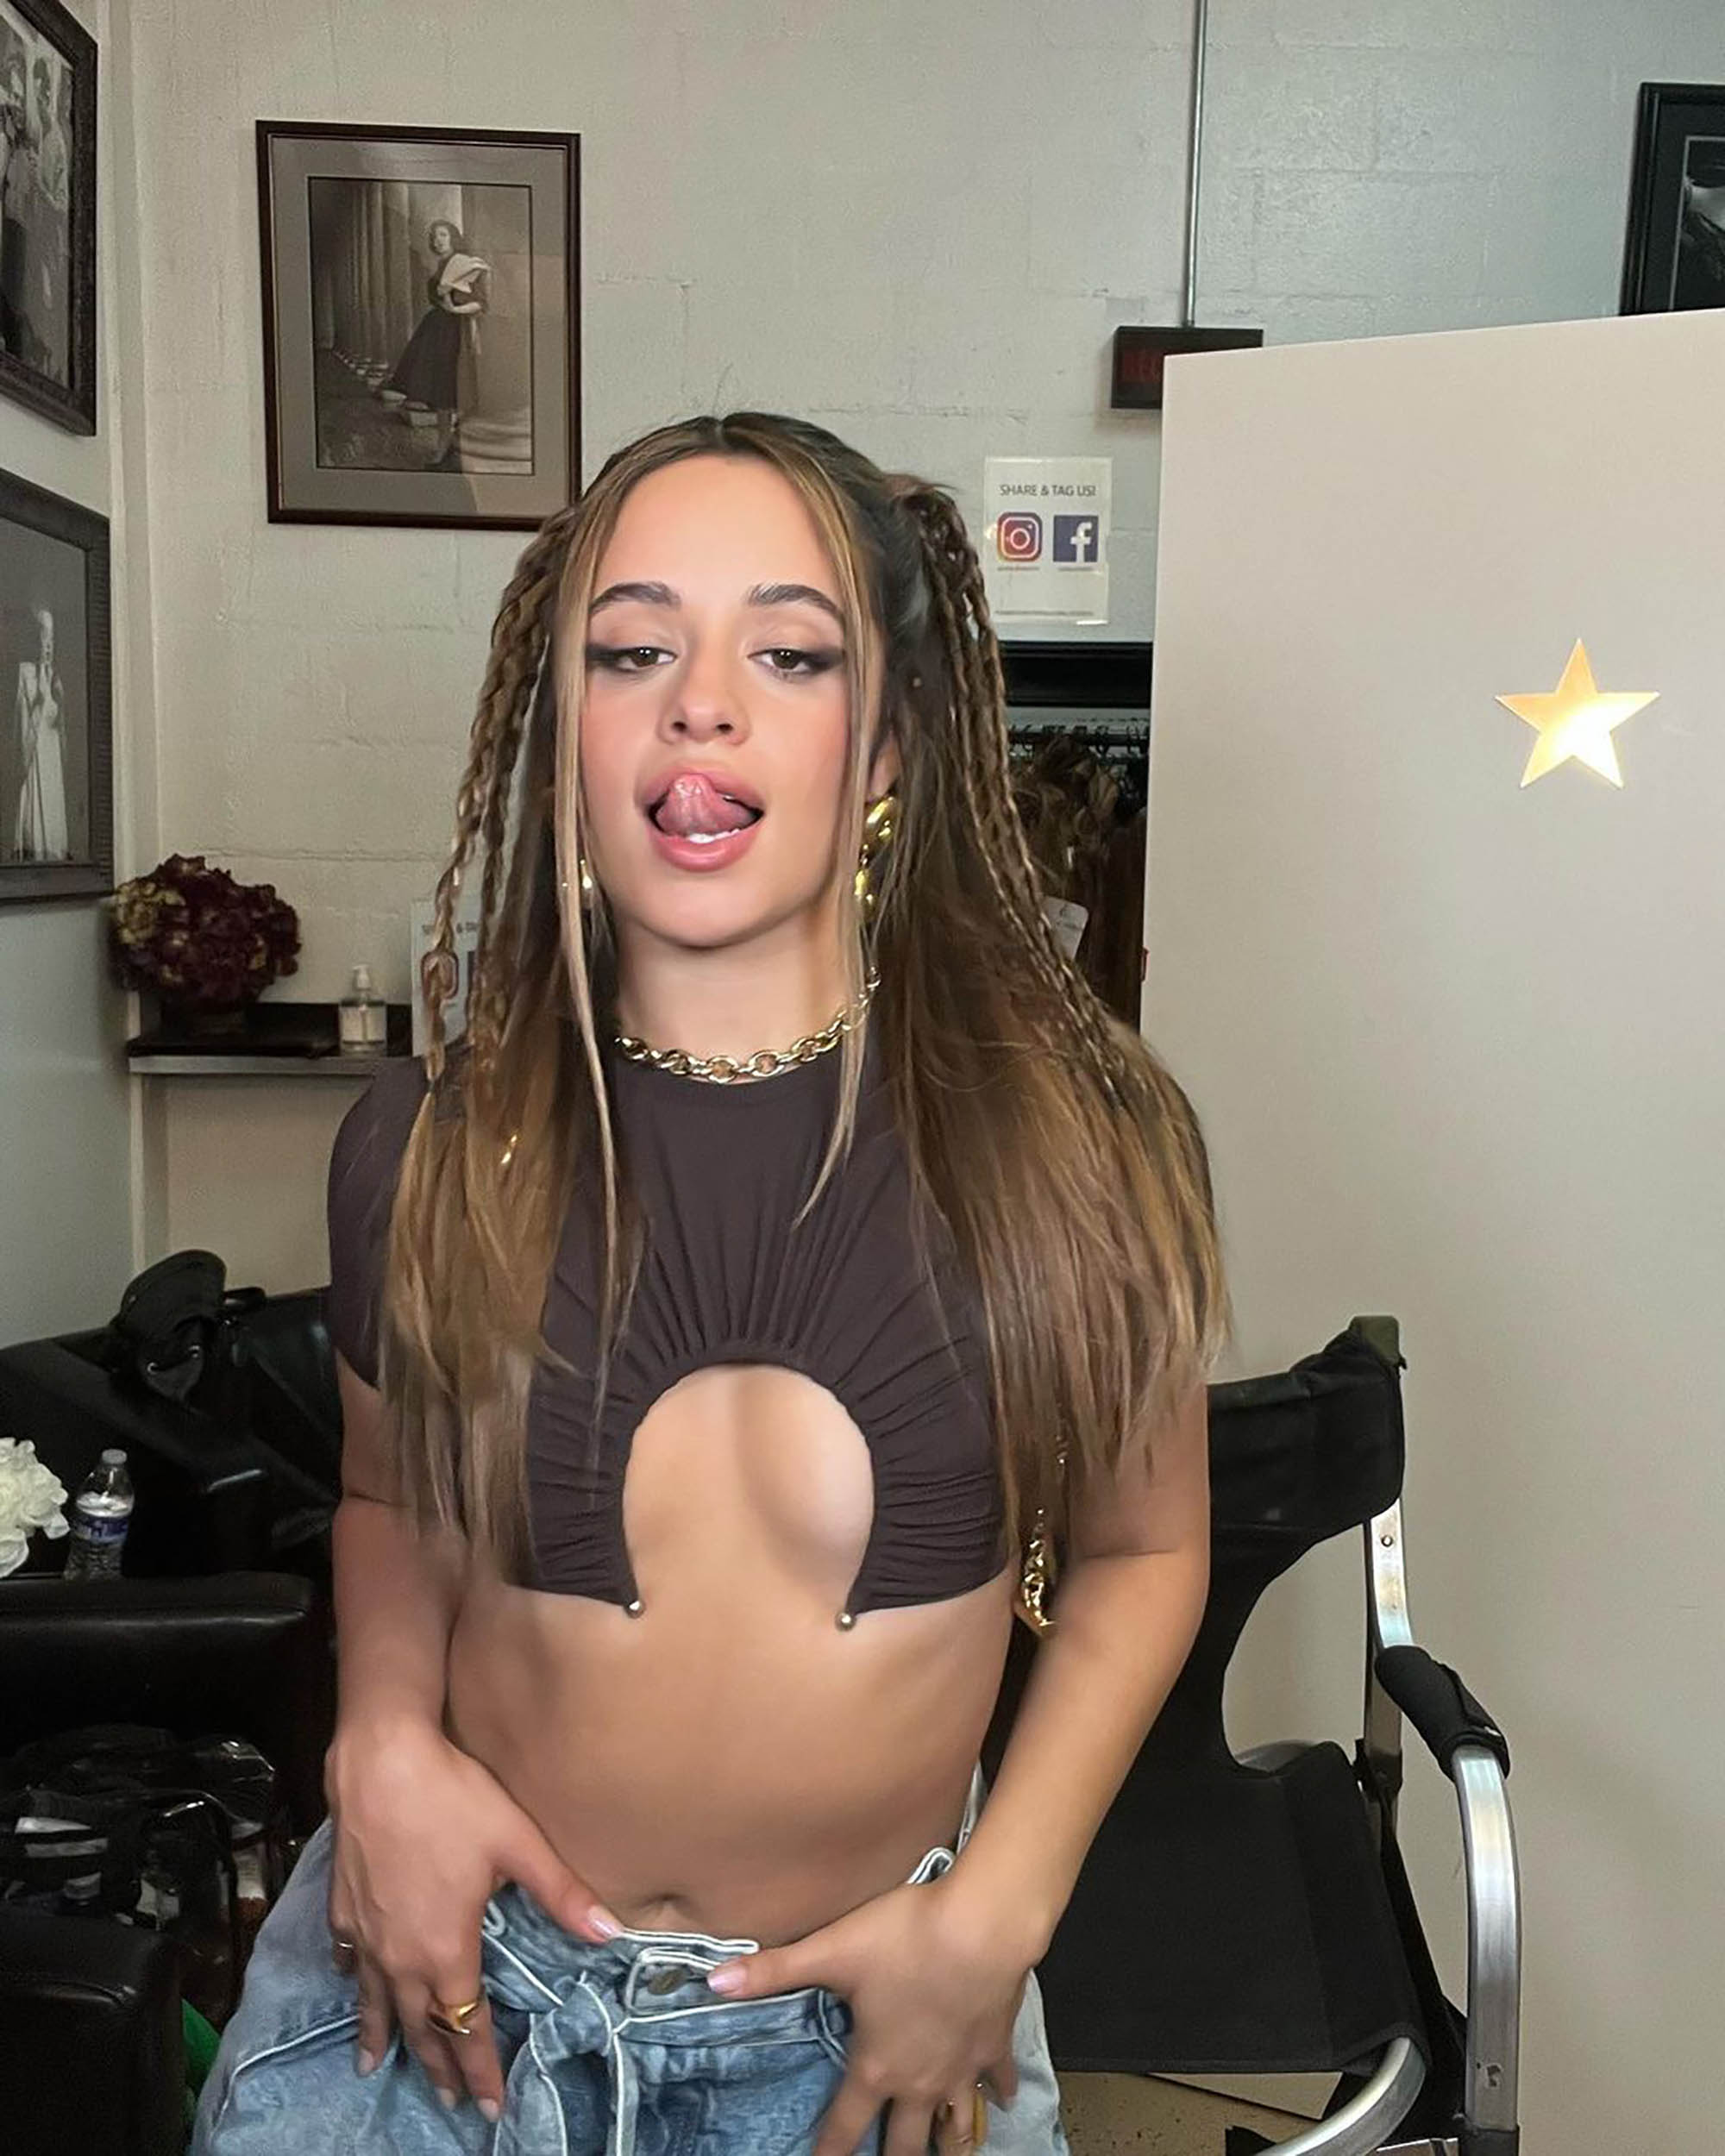 Single Camila Cabello shows off her underboob in a thirst trap posted to Instagram.